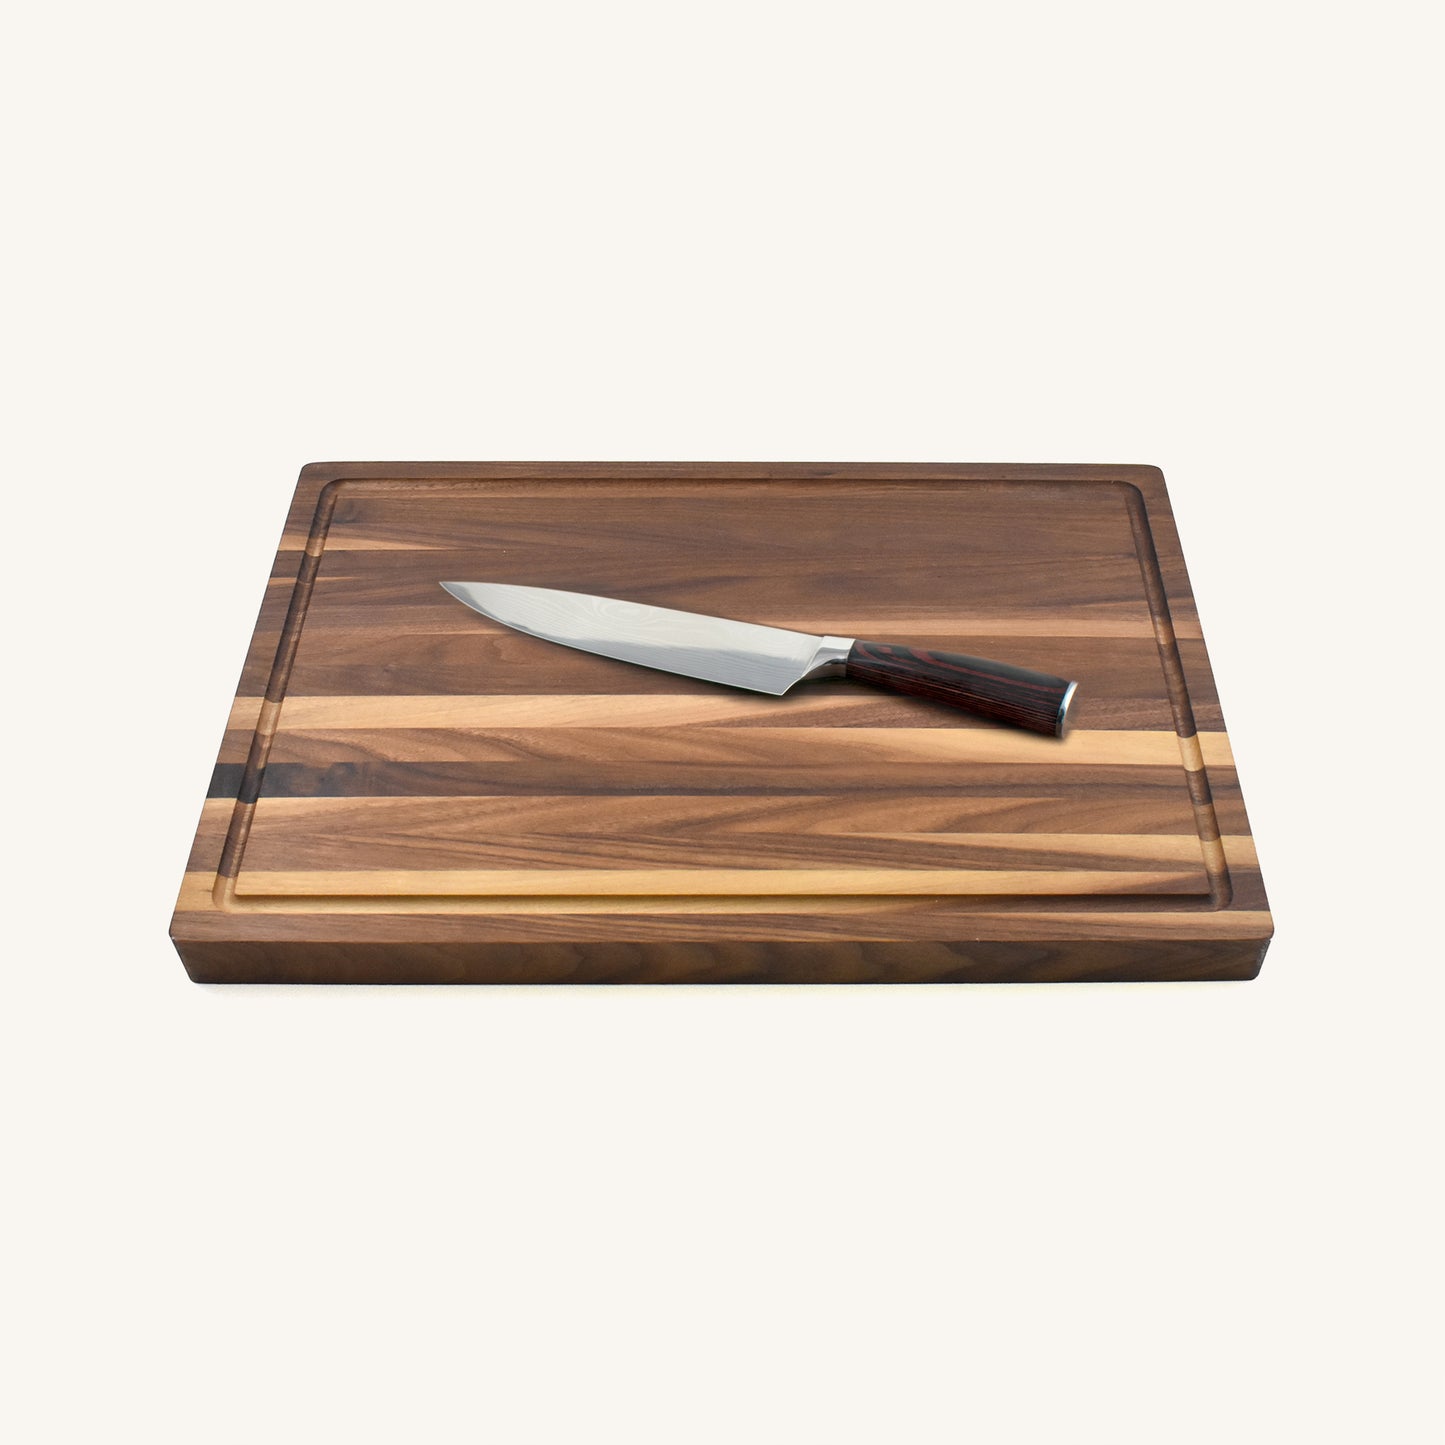 Bundle of Butcher Block Board with Chef Knife